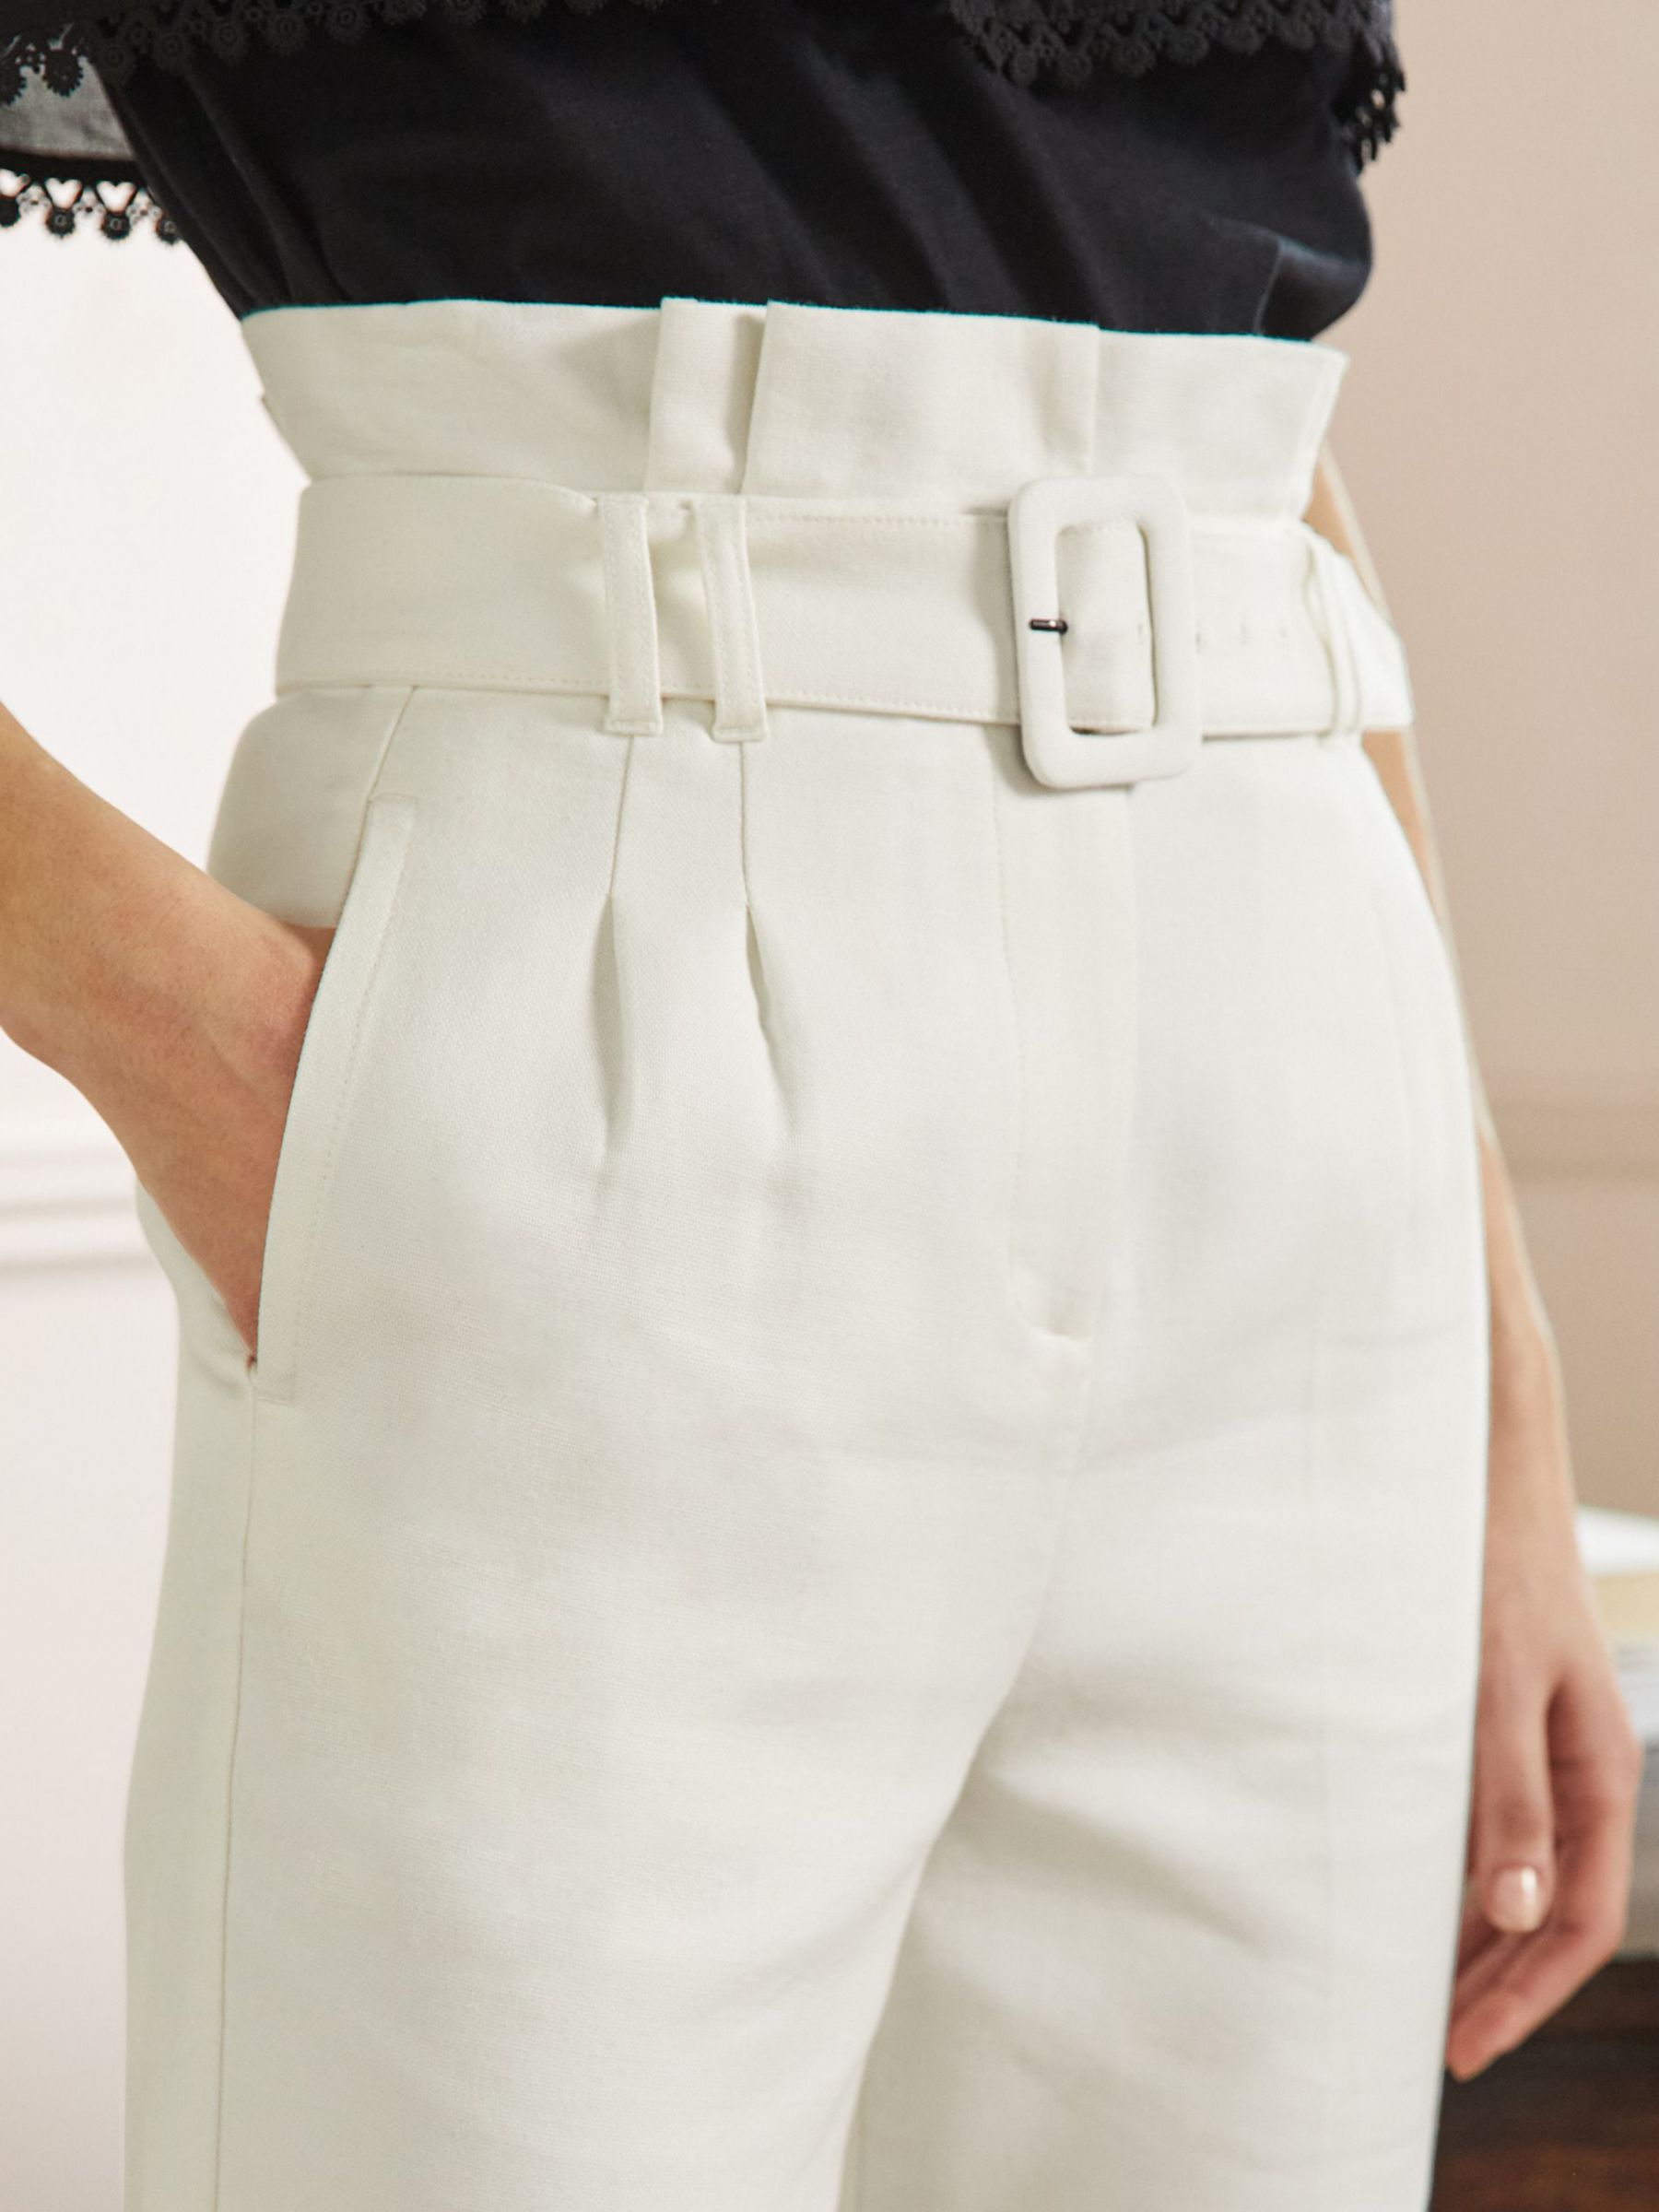 Boden Carrie Paperbag Trousers, Ivory